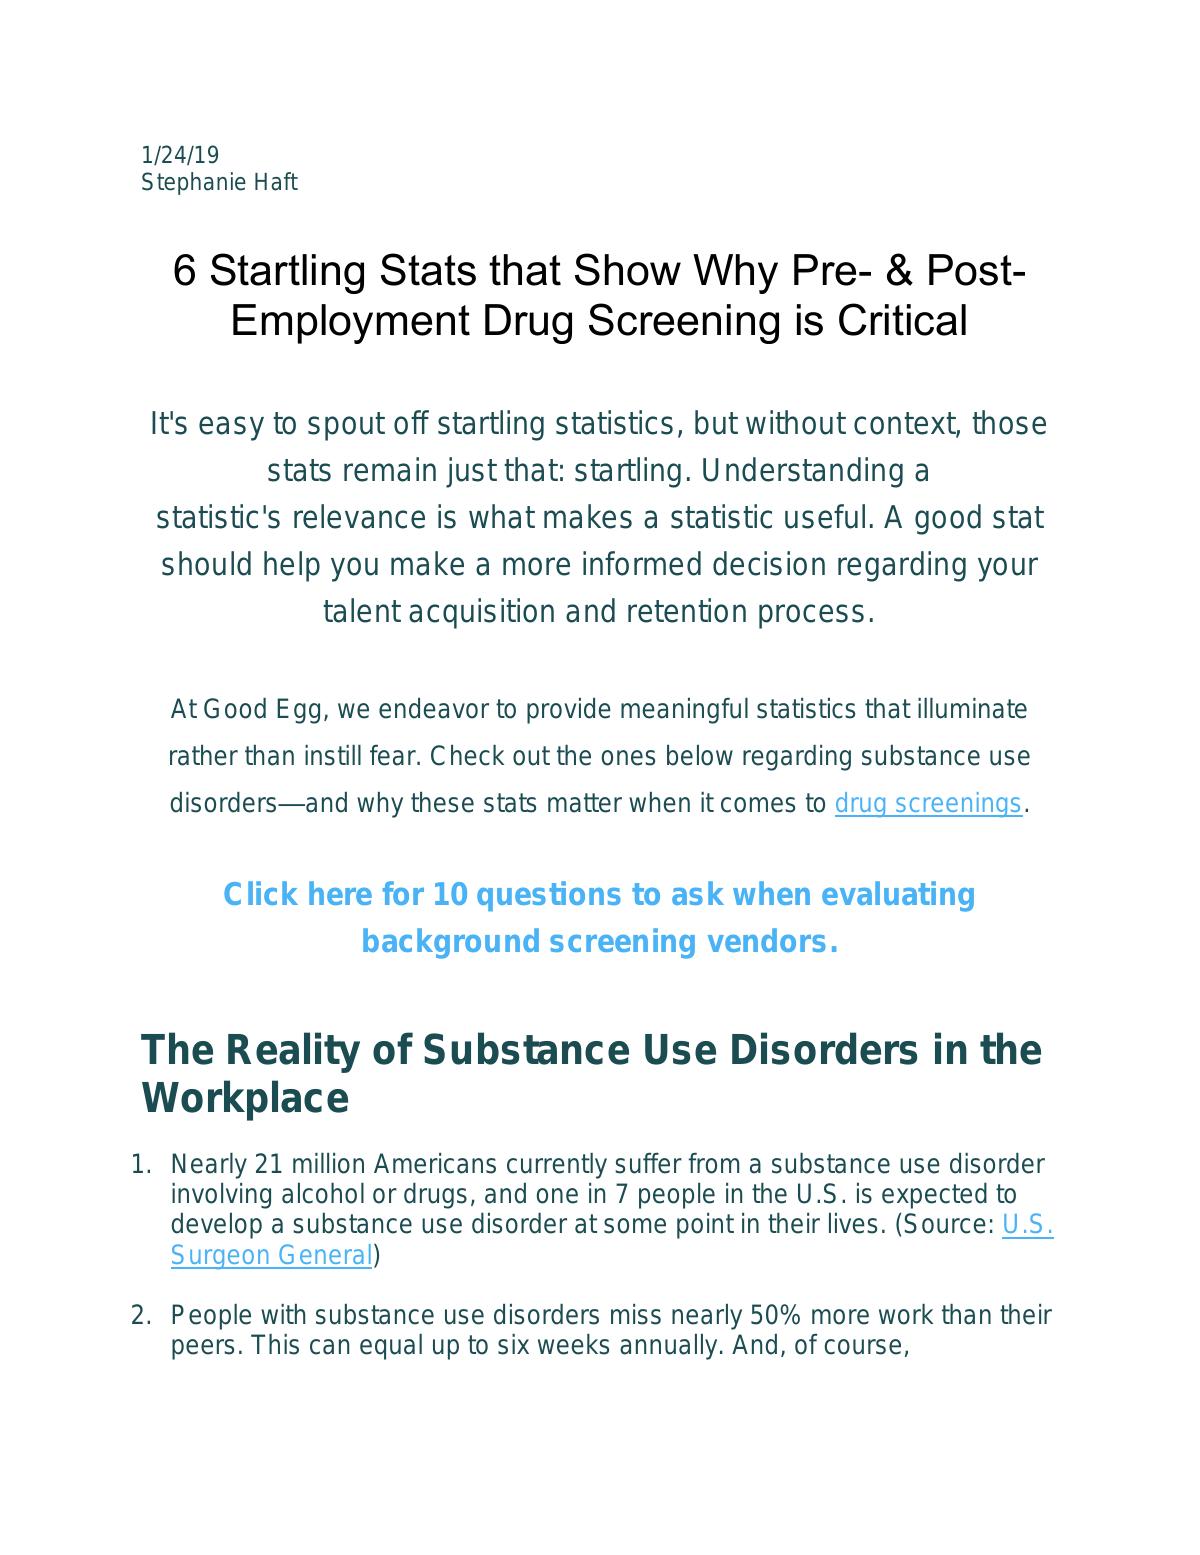 6 Startling Stats that Show Why Pre- & Post-Employment Drug Screening is Critical